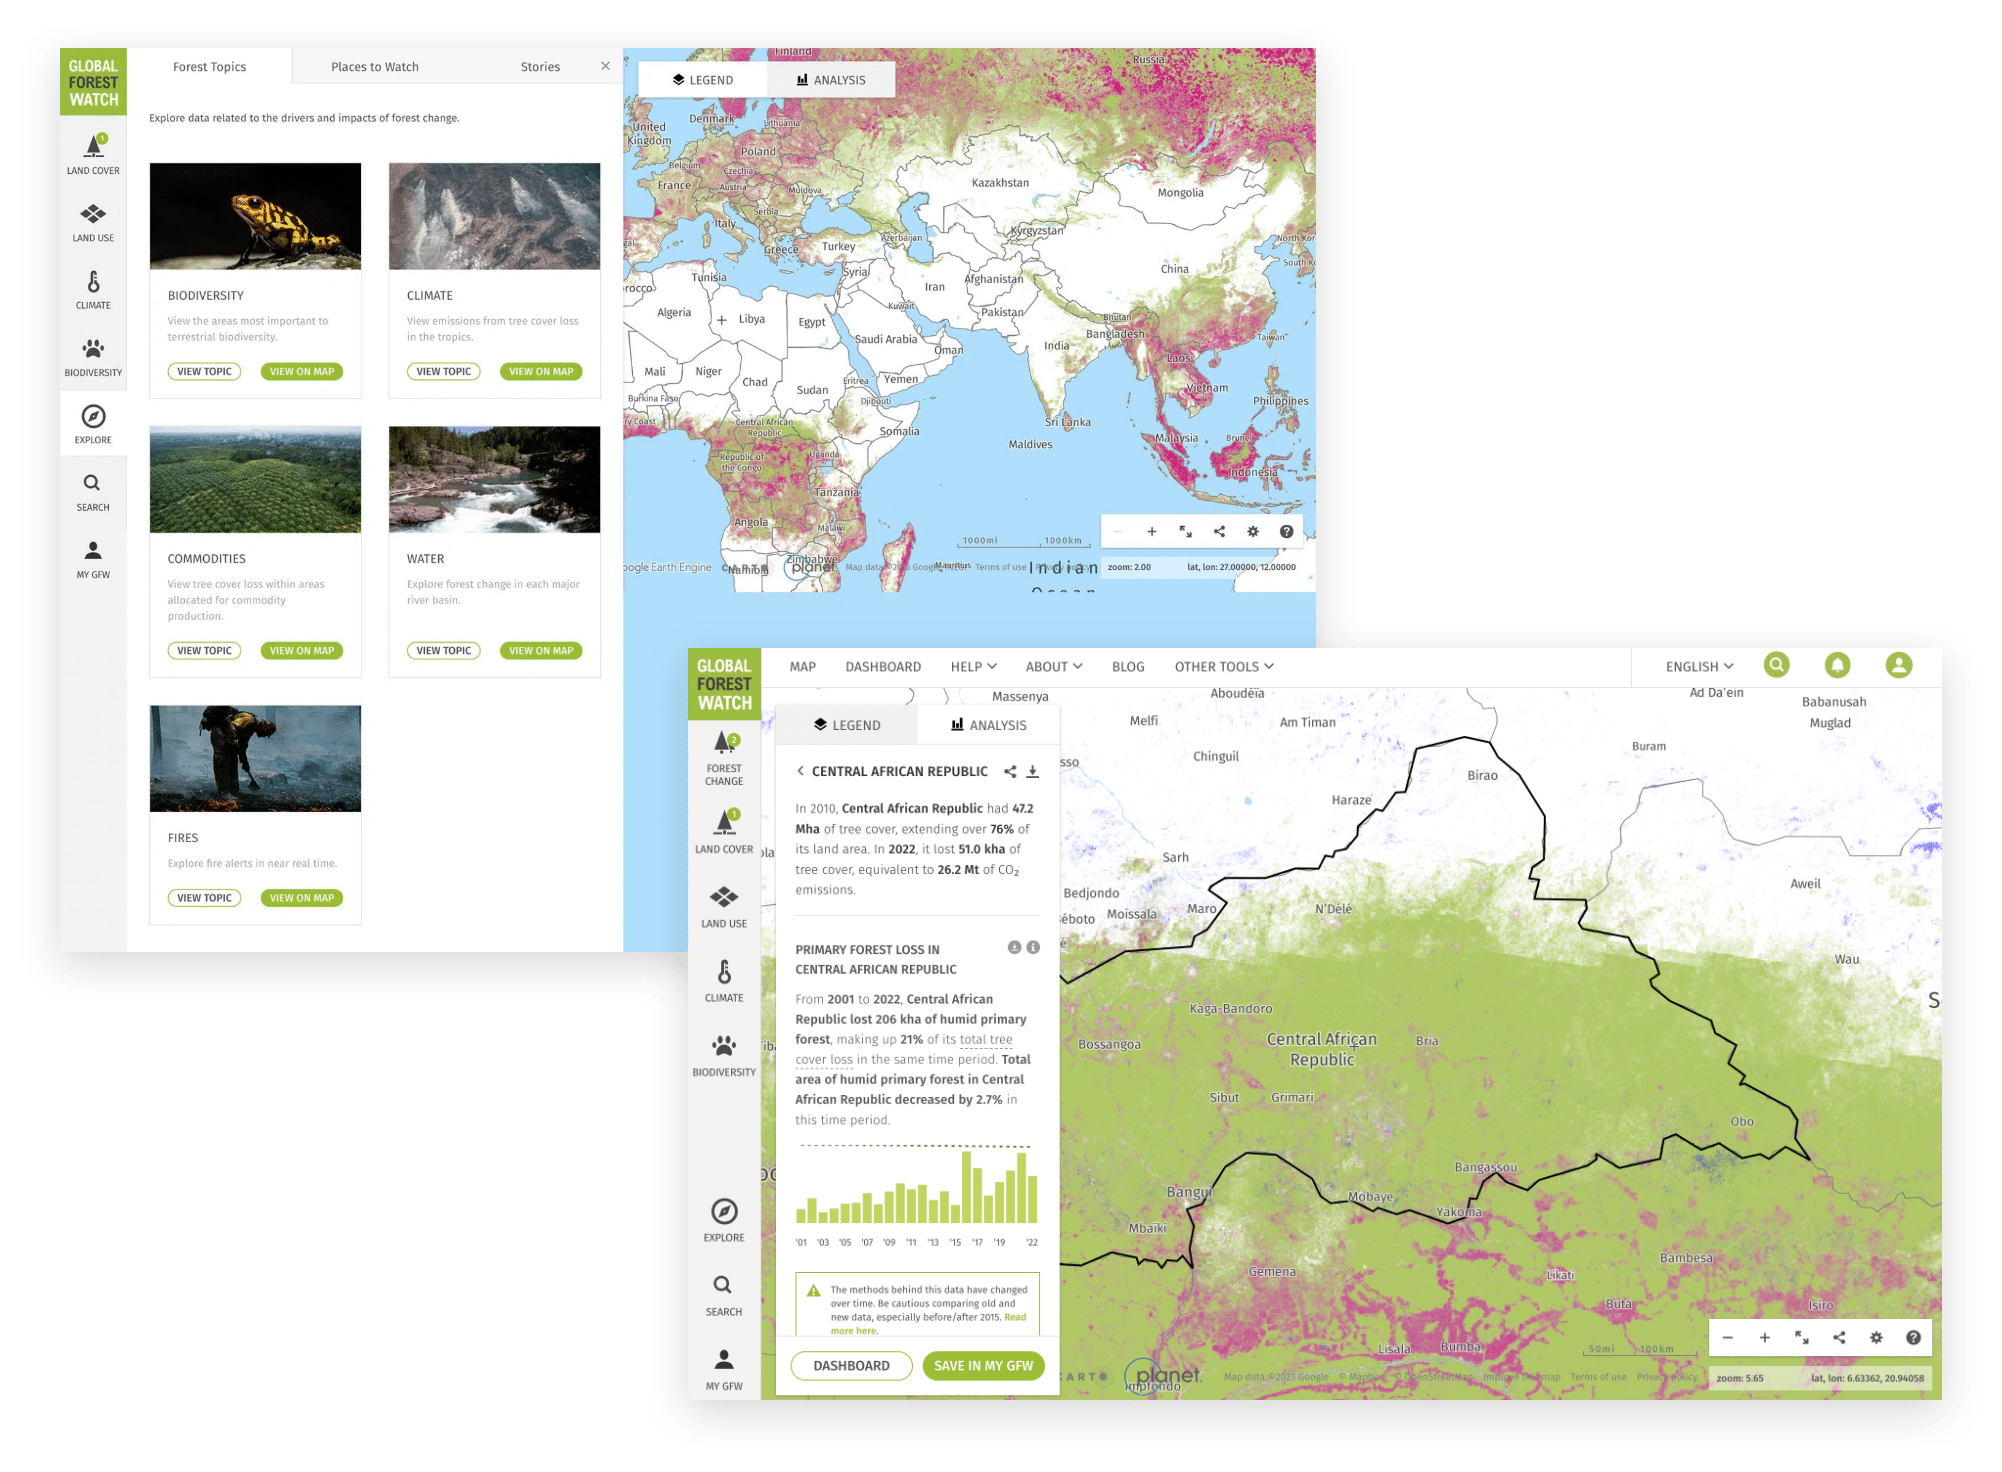 collage illustrating a compilation of innovative initiatives and accomplishments of global forest watch (gfw).